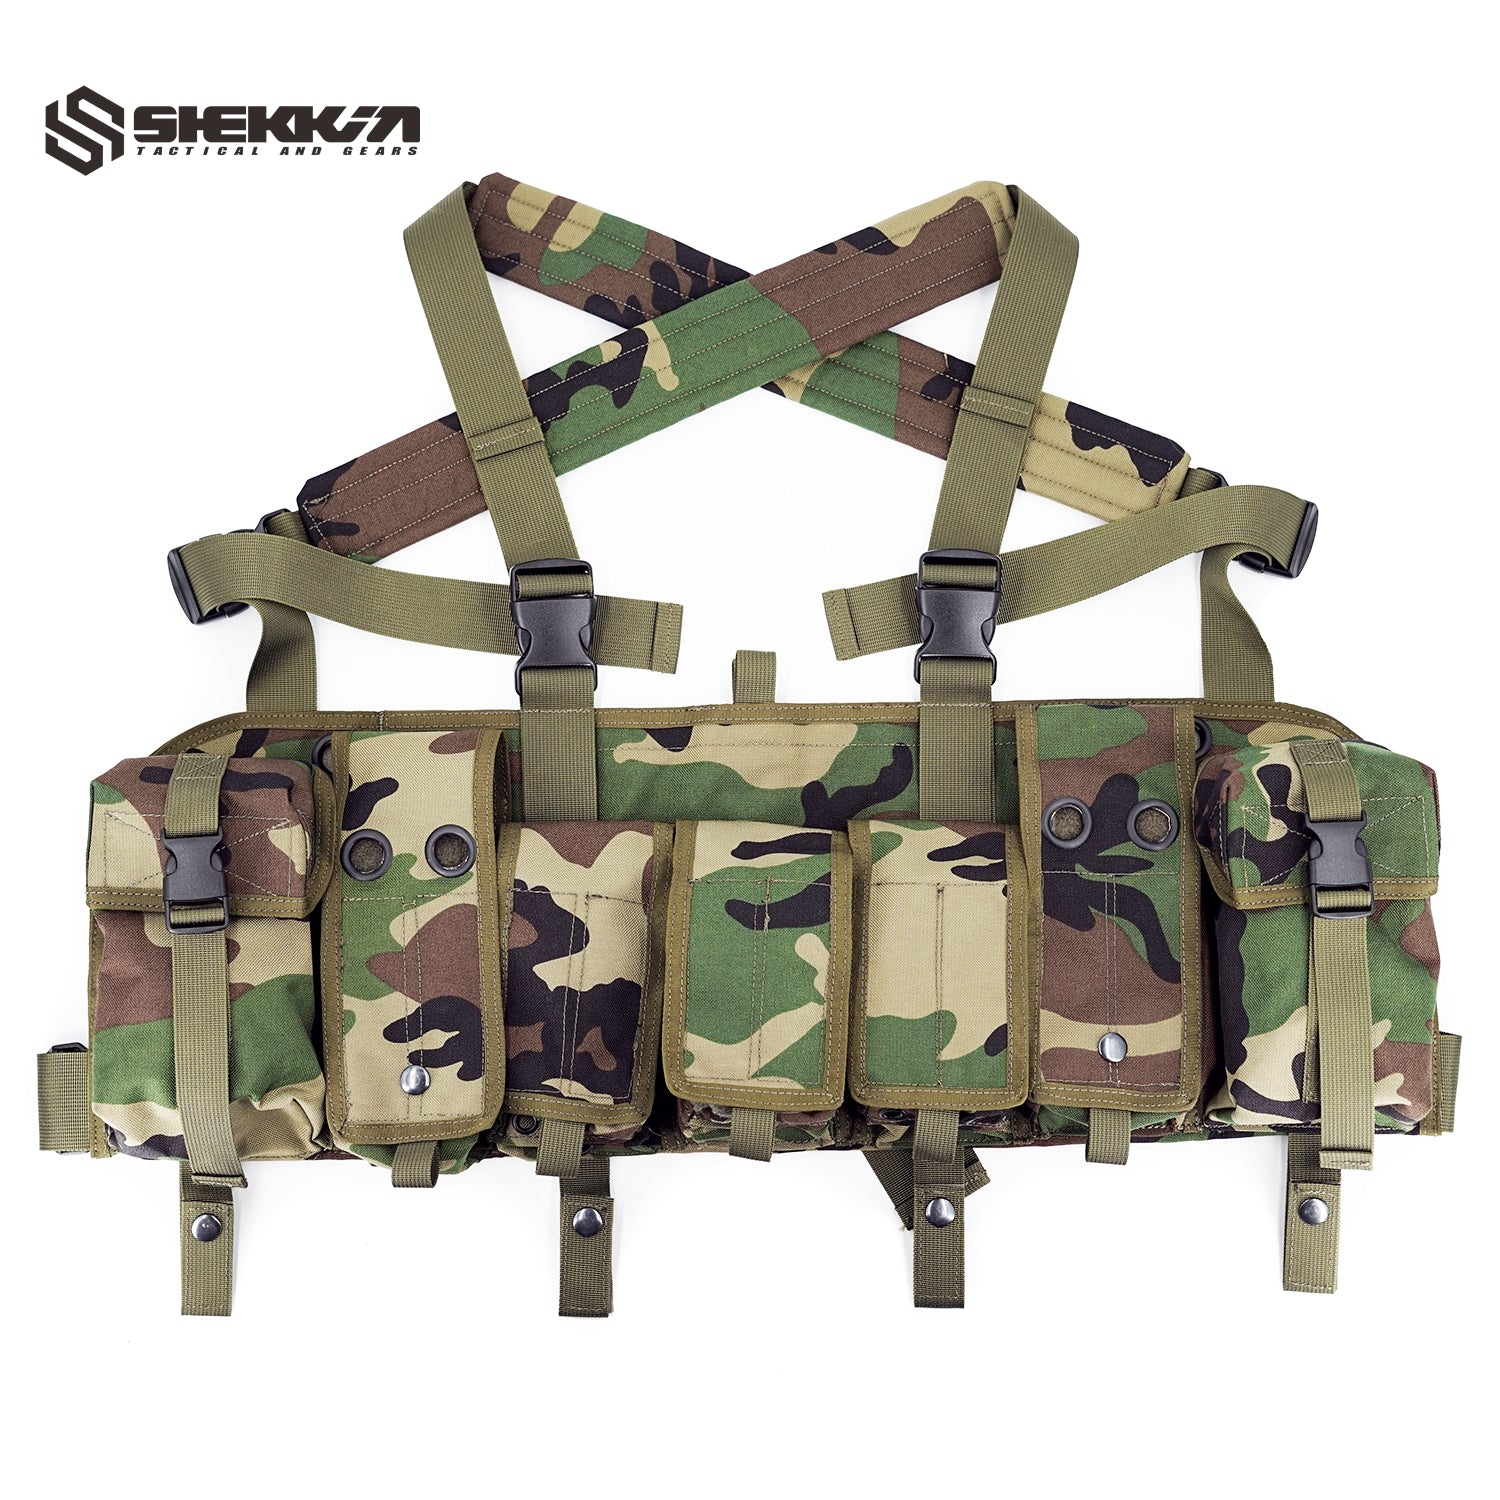 Delta force SF Tactic Chest Rig - Shekkin Gears